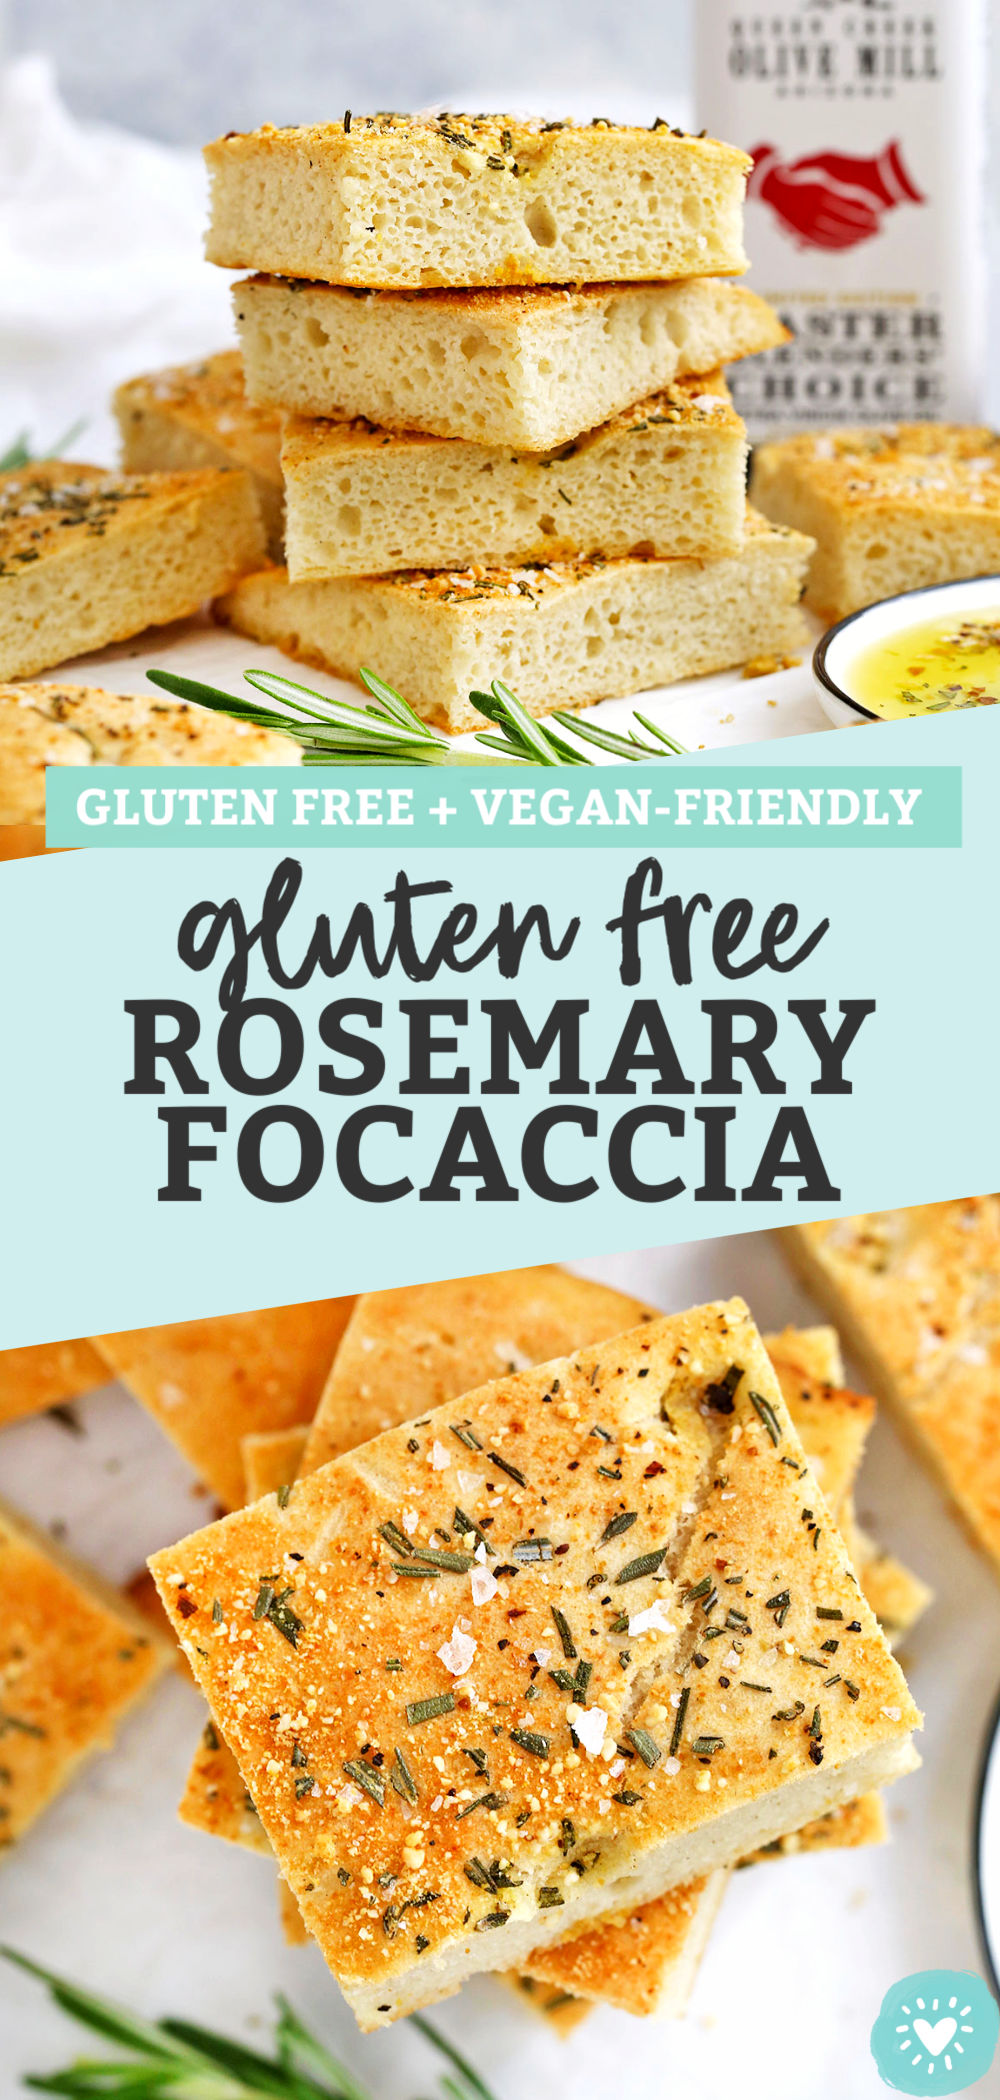 Gluten Free Focaccia - This rosemary focaccia is made entirely gluten free and vegan! It's easier than you think and has the perfect crispy crust and tender, light center. Yum! // gluten free focaccia recipe // rosemary focaccia #focaccia #glutenfree #glutenfreebread #glutenfreebaking